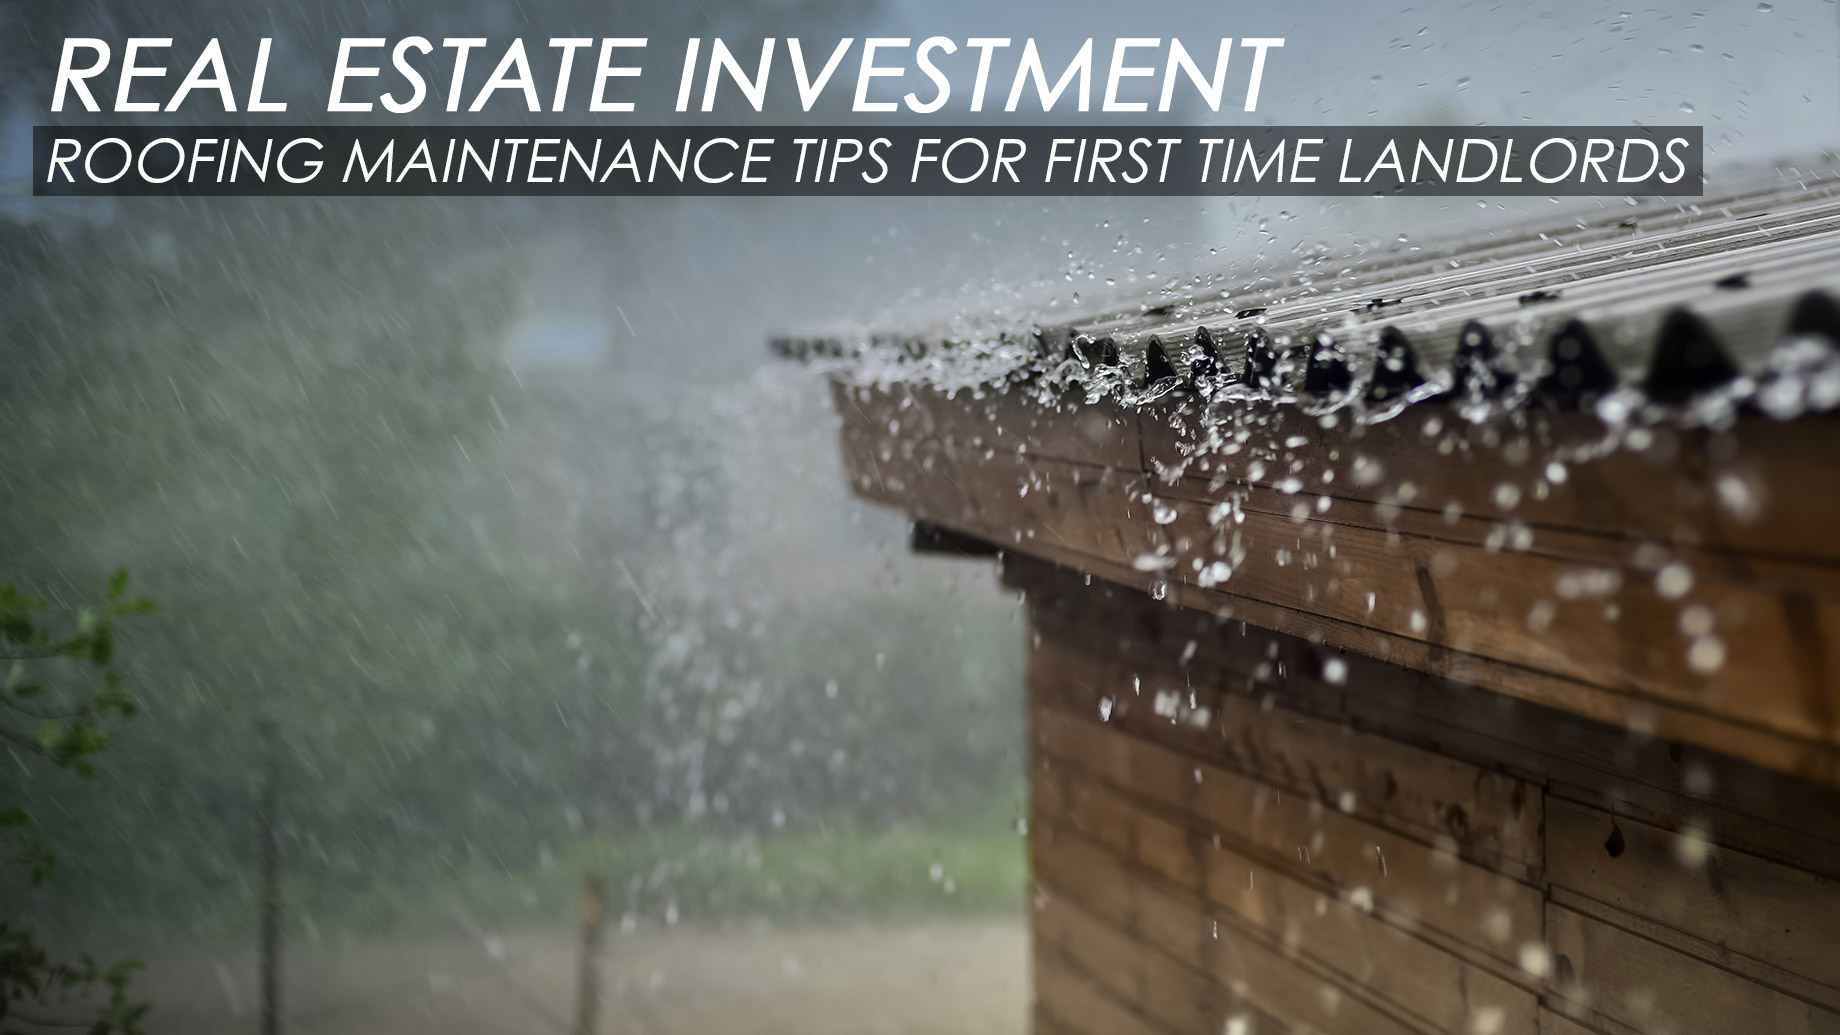 Real Estate Investment - Roofing Maintenance Tips For First Time Landlords